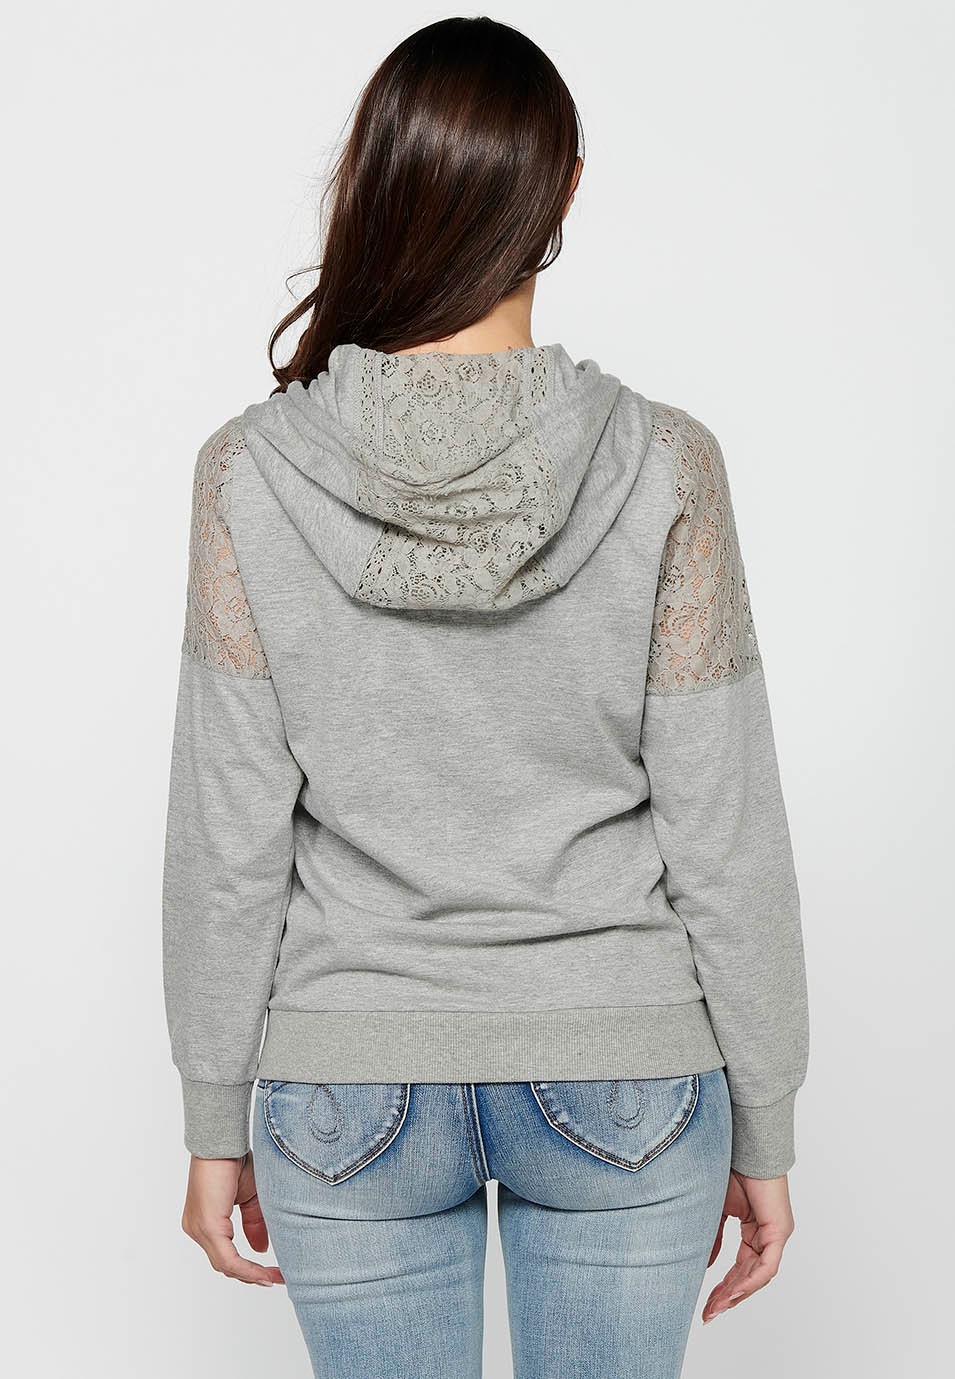 Sweatshirt jacket with zipper front closure and lace details with gray hooded collar for women 7